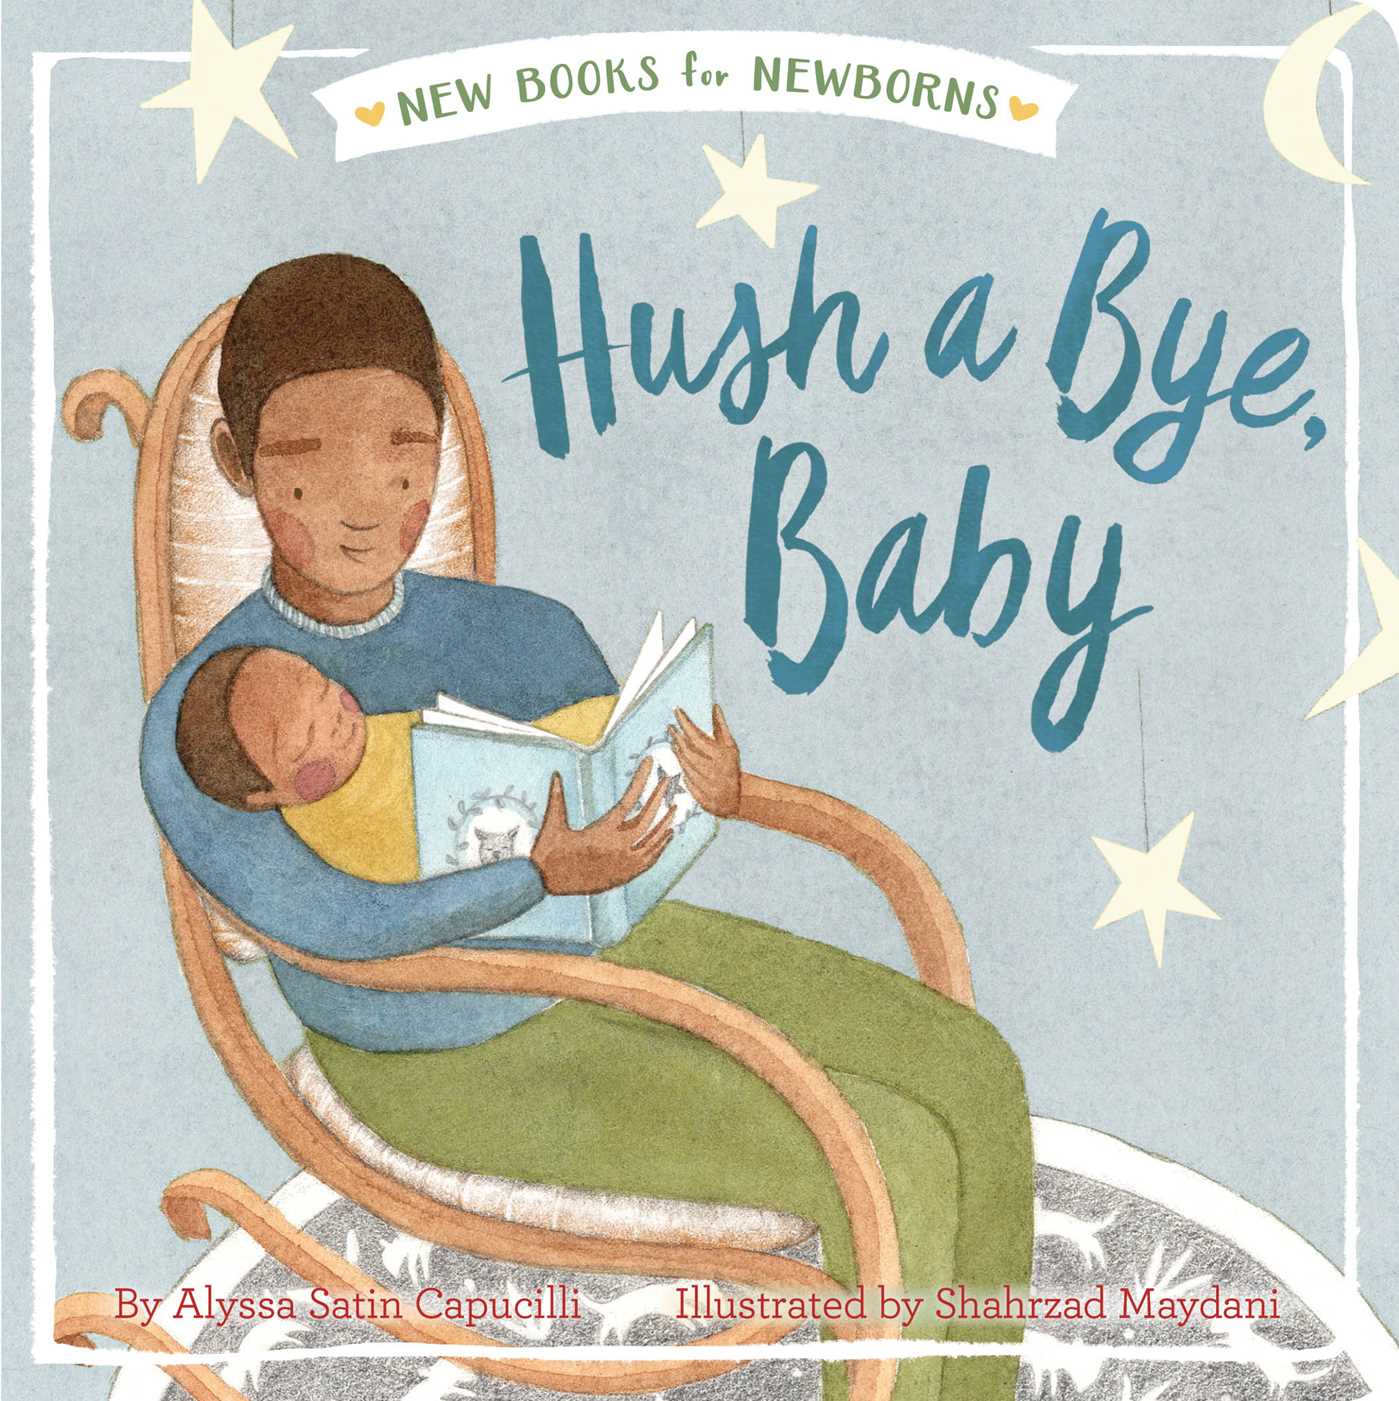 Hush a Bye, Baby (Board Book) - image 1 of 1